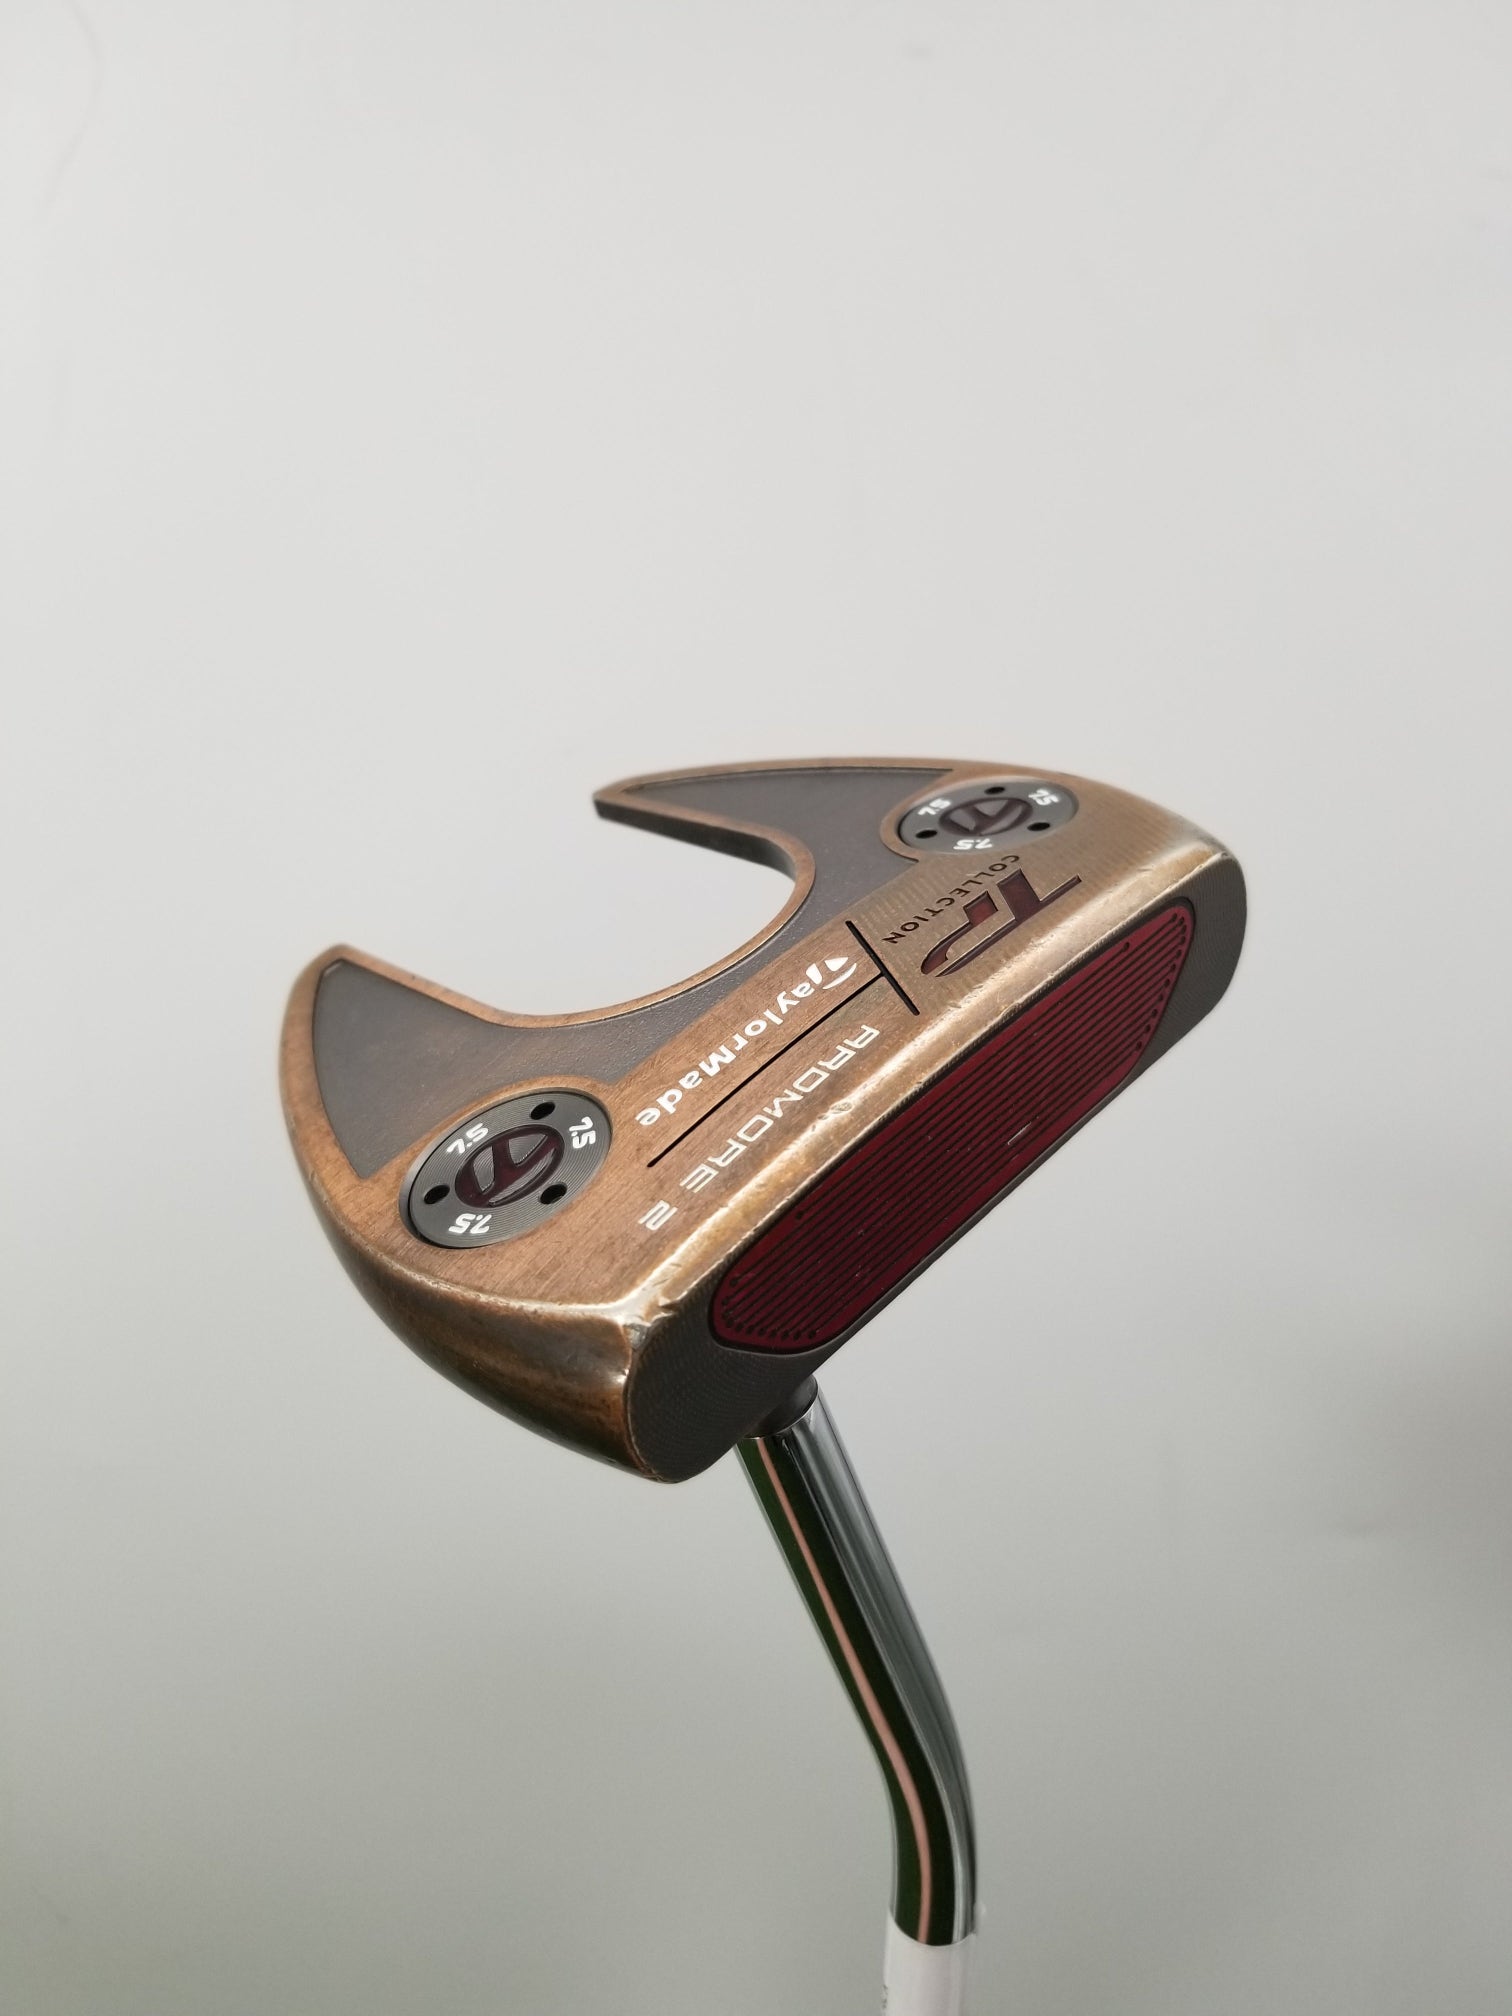 2018 TAYLORMADE TP COLLECTION ARDMORE 2 BLACK COPPER PUTTER 35" GOOD